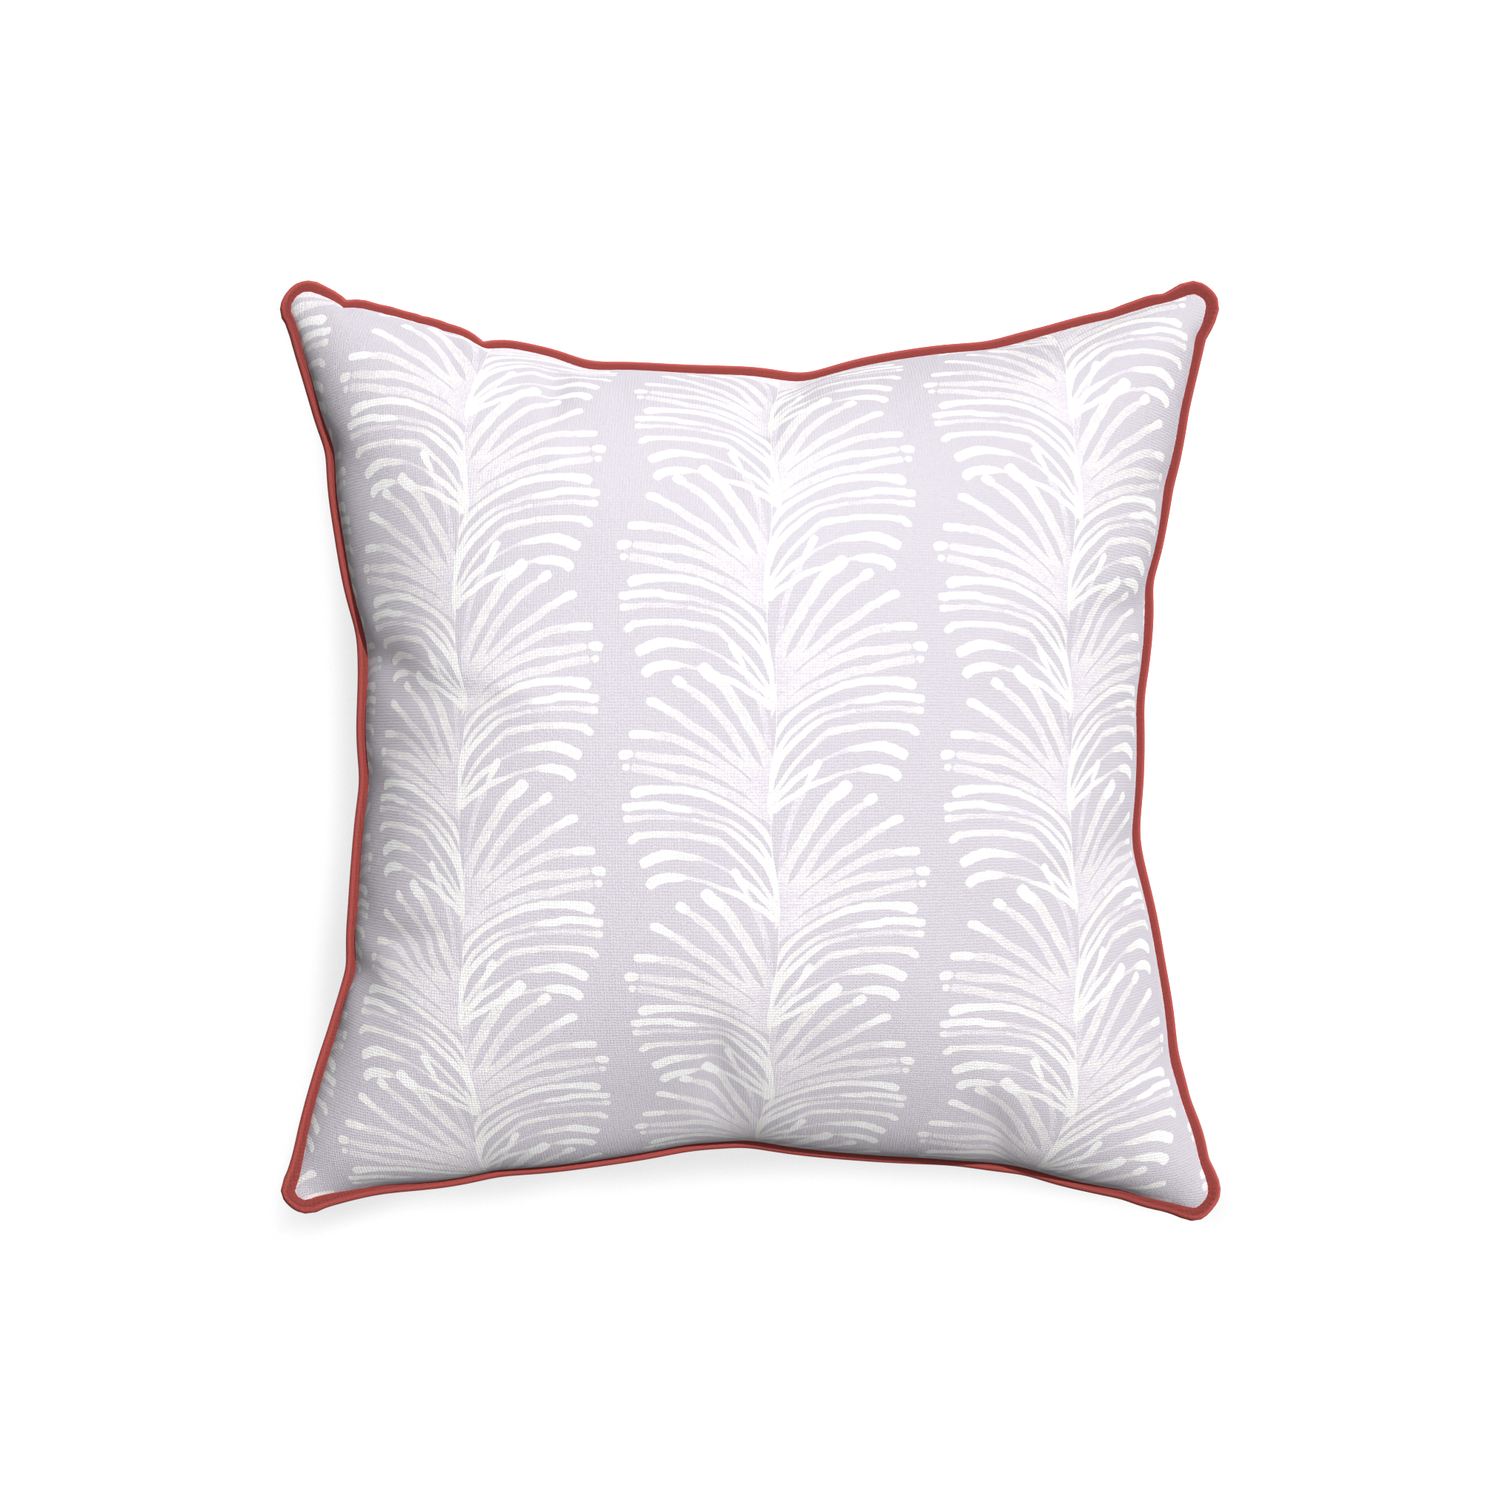 20-square emma lavender custom lavender botanical stripepillow with c piping on white background